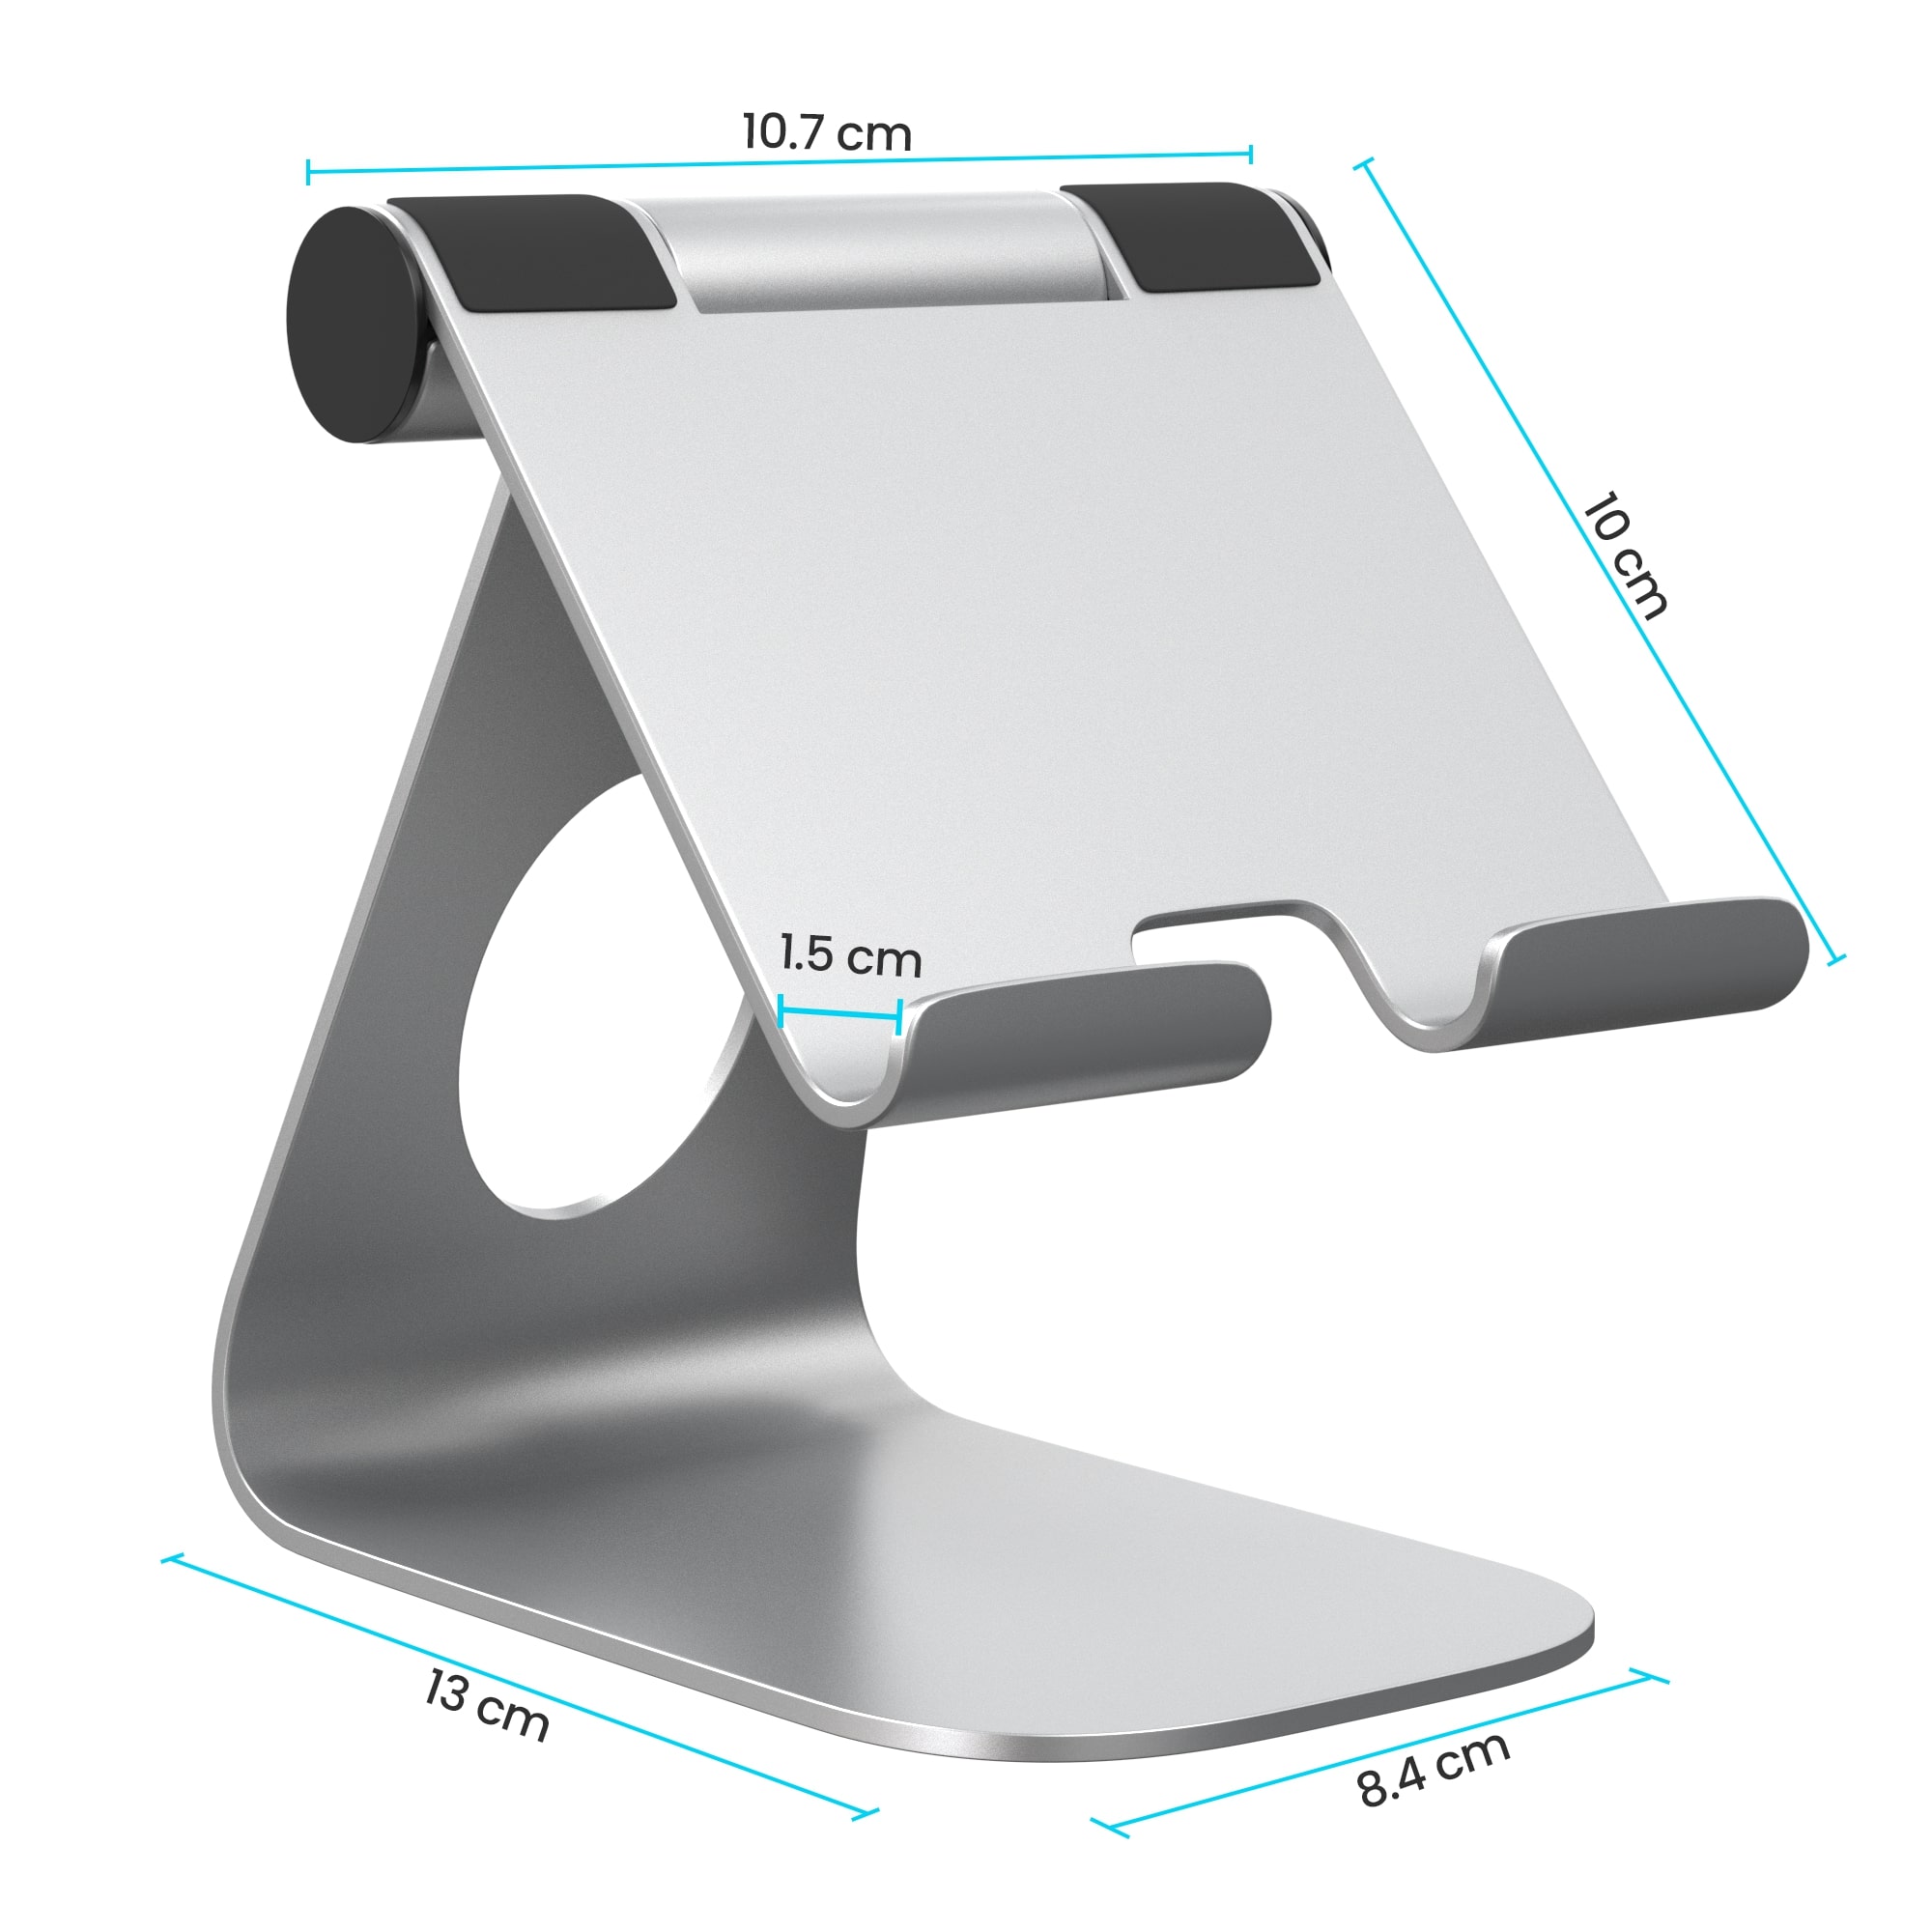 BUY ELV DIRECT Tablet Stand Aluminium Adjustable Foldable Cell Phone